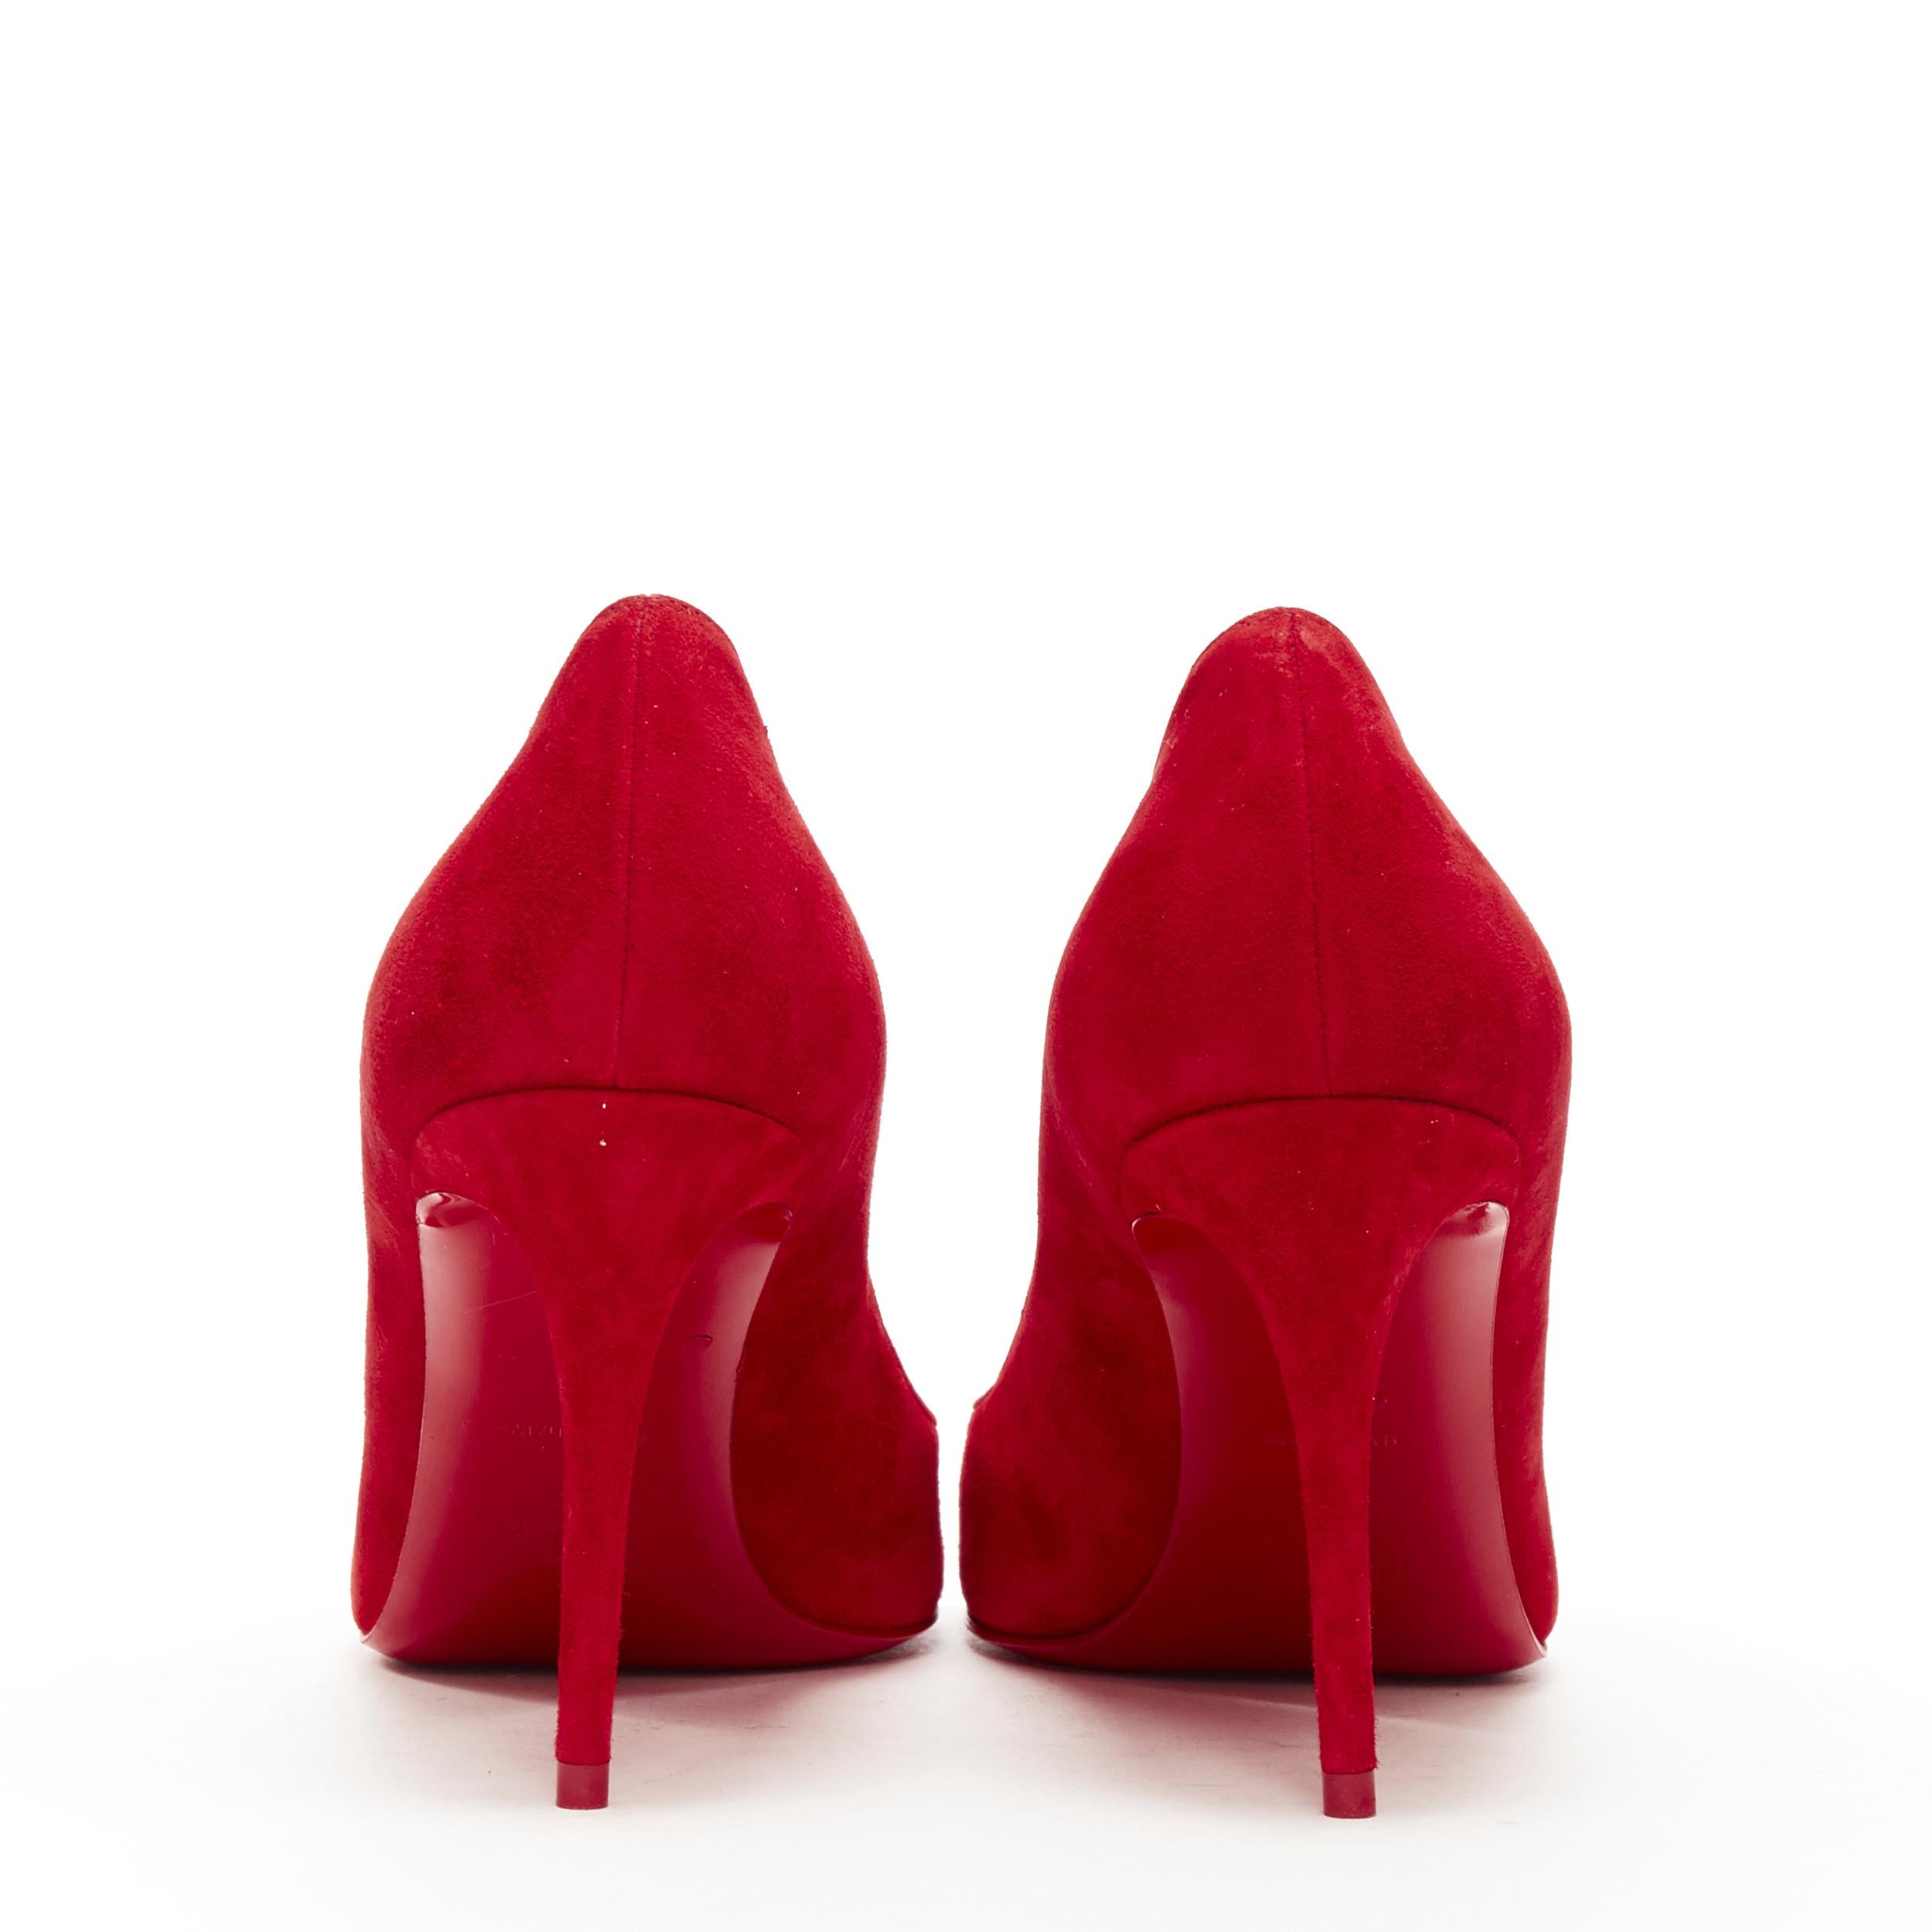 christian louboutin red suede pumps